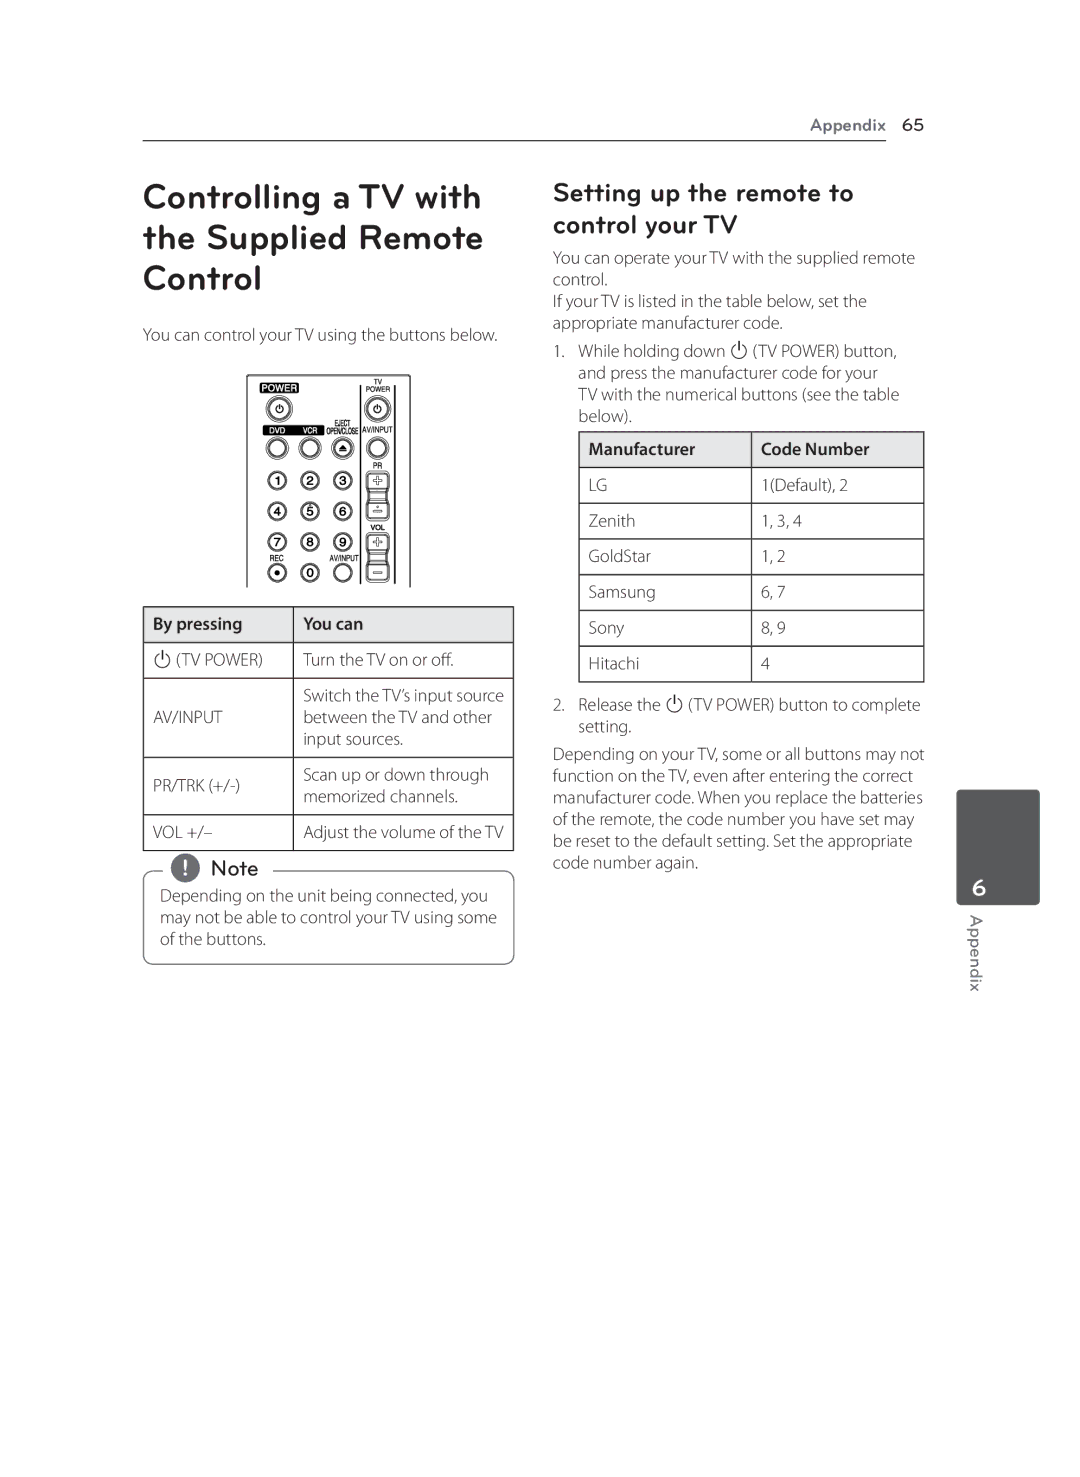 LG Electronics RCT699H Controlling a TV with the Supplied Remote Control, Setting up the remote to control your TV 